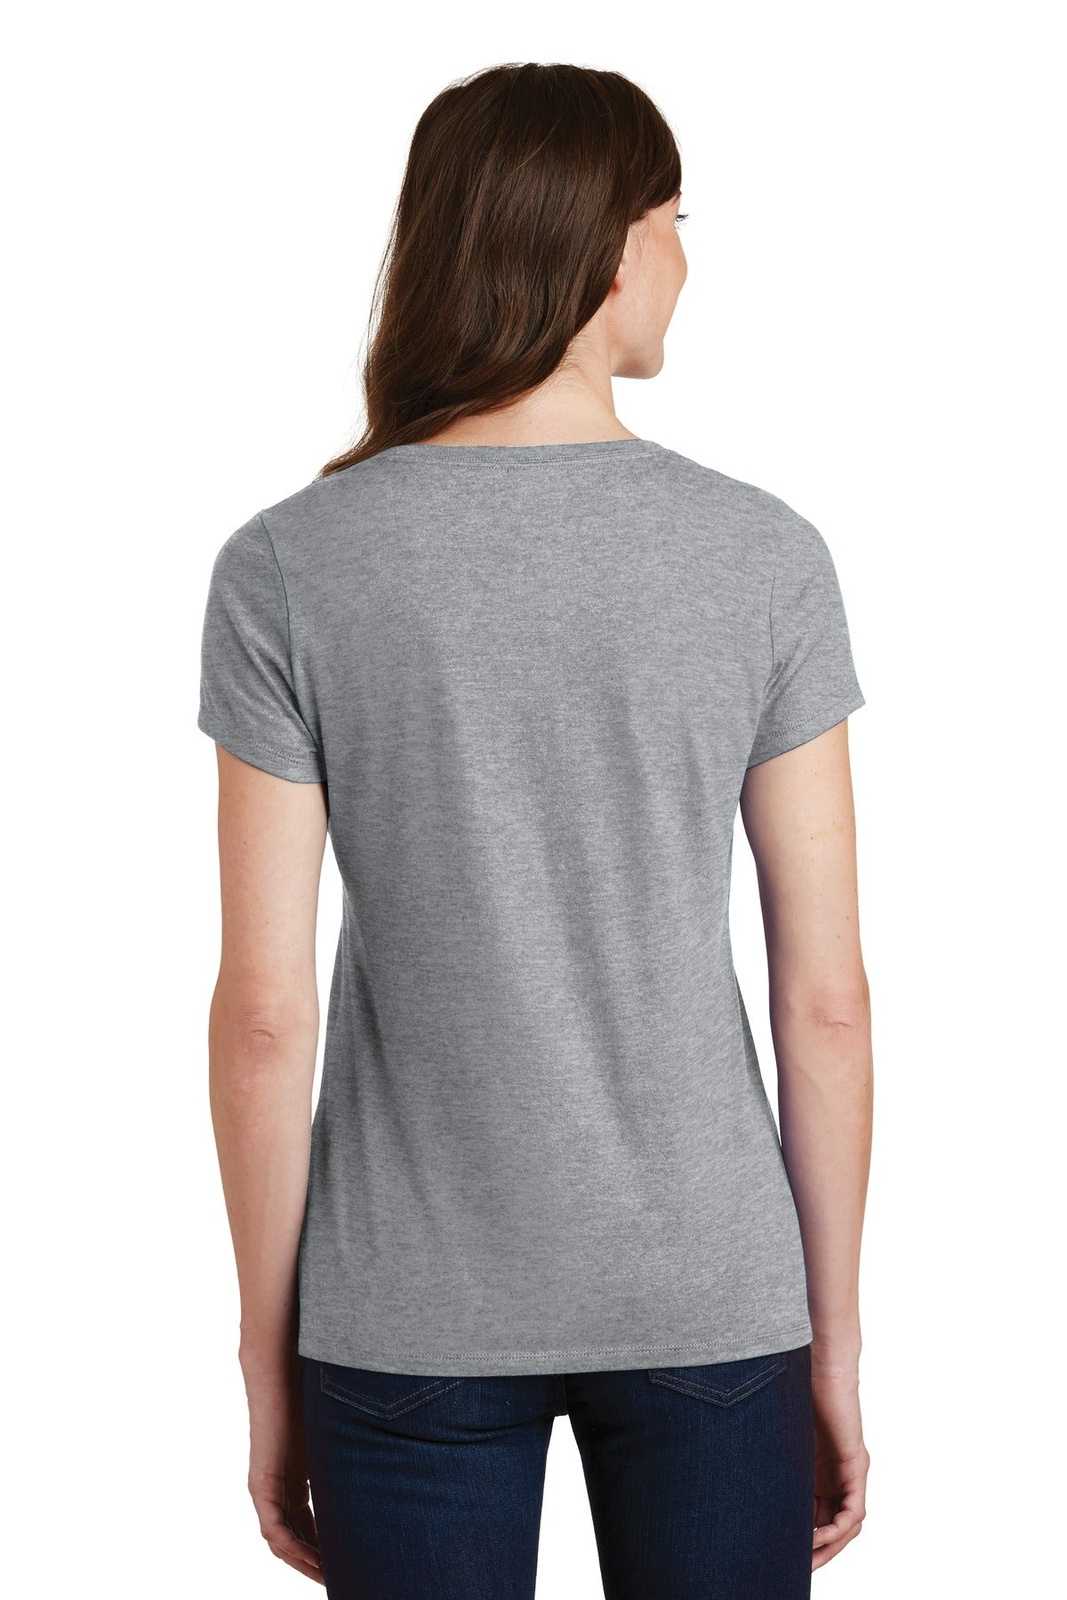 Port &amp; Company LPC450V Ladies Fan Favorite V-Neck Tee - Athletic Heather - HIT a Double - 2